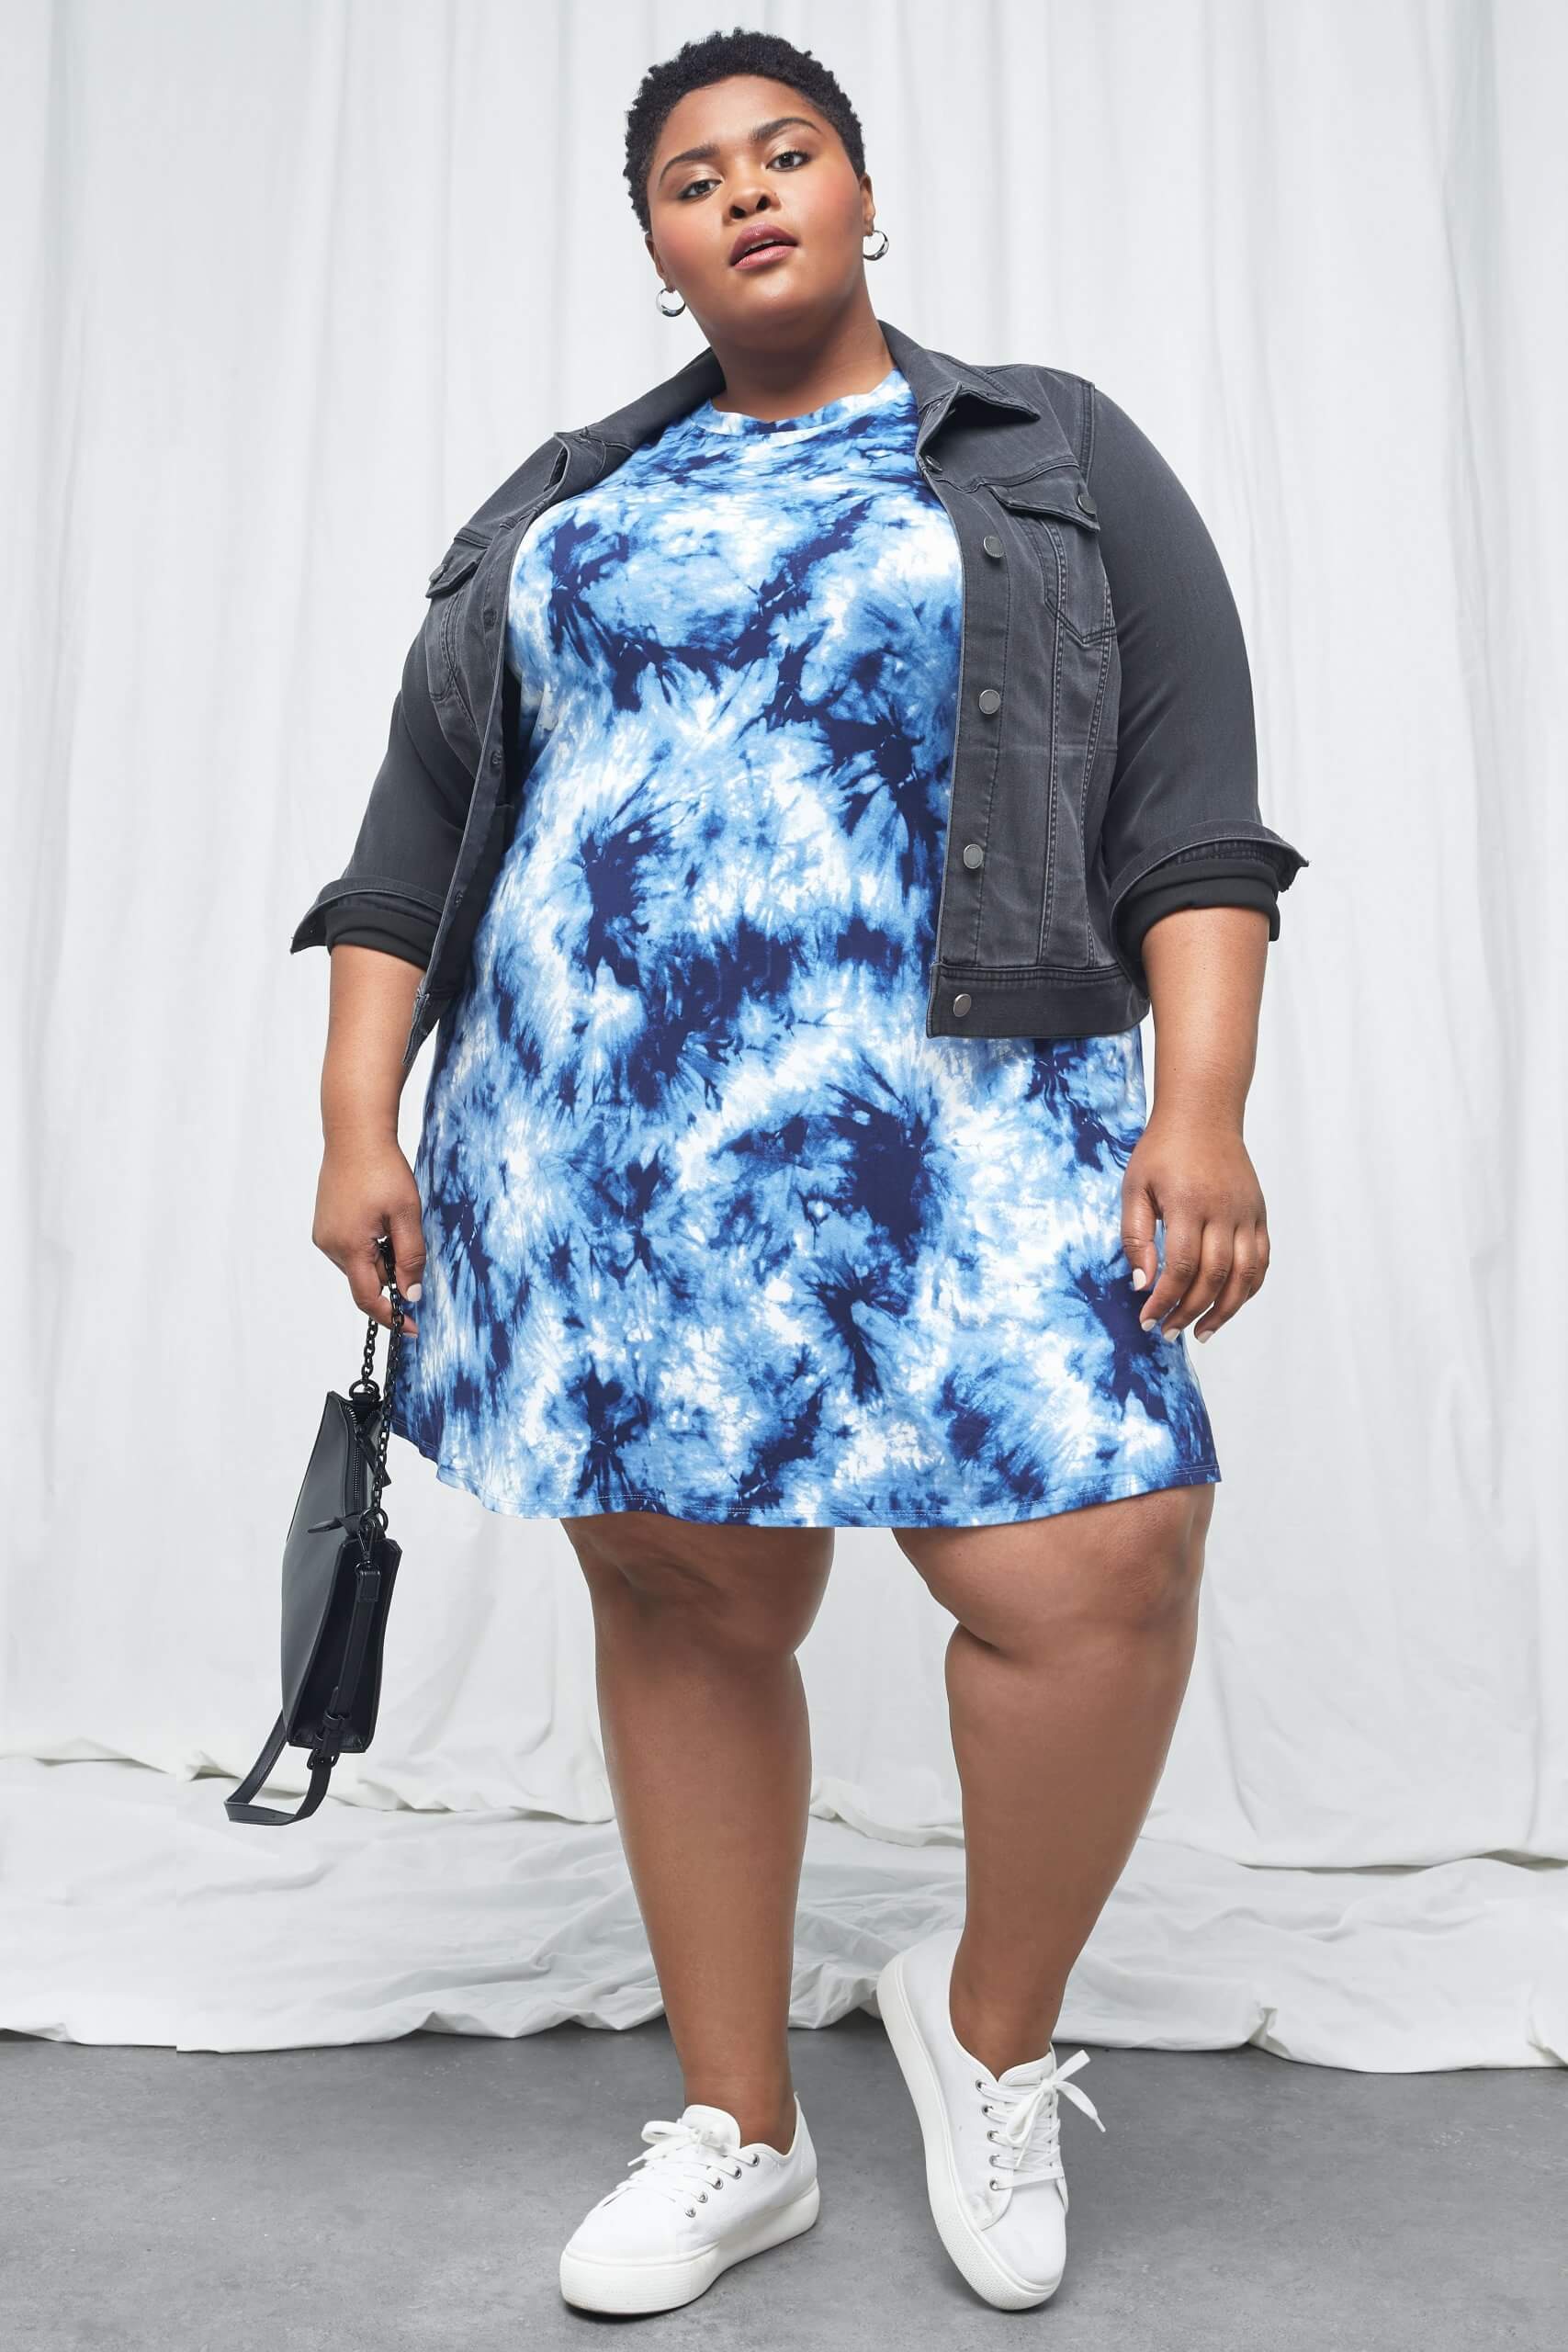 Stylish Curvy Fashion: Embrace Your Body with These Plus Size